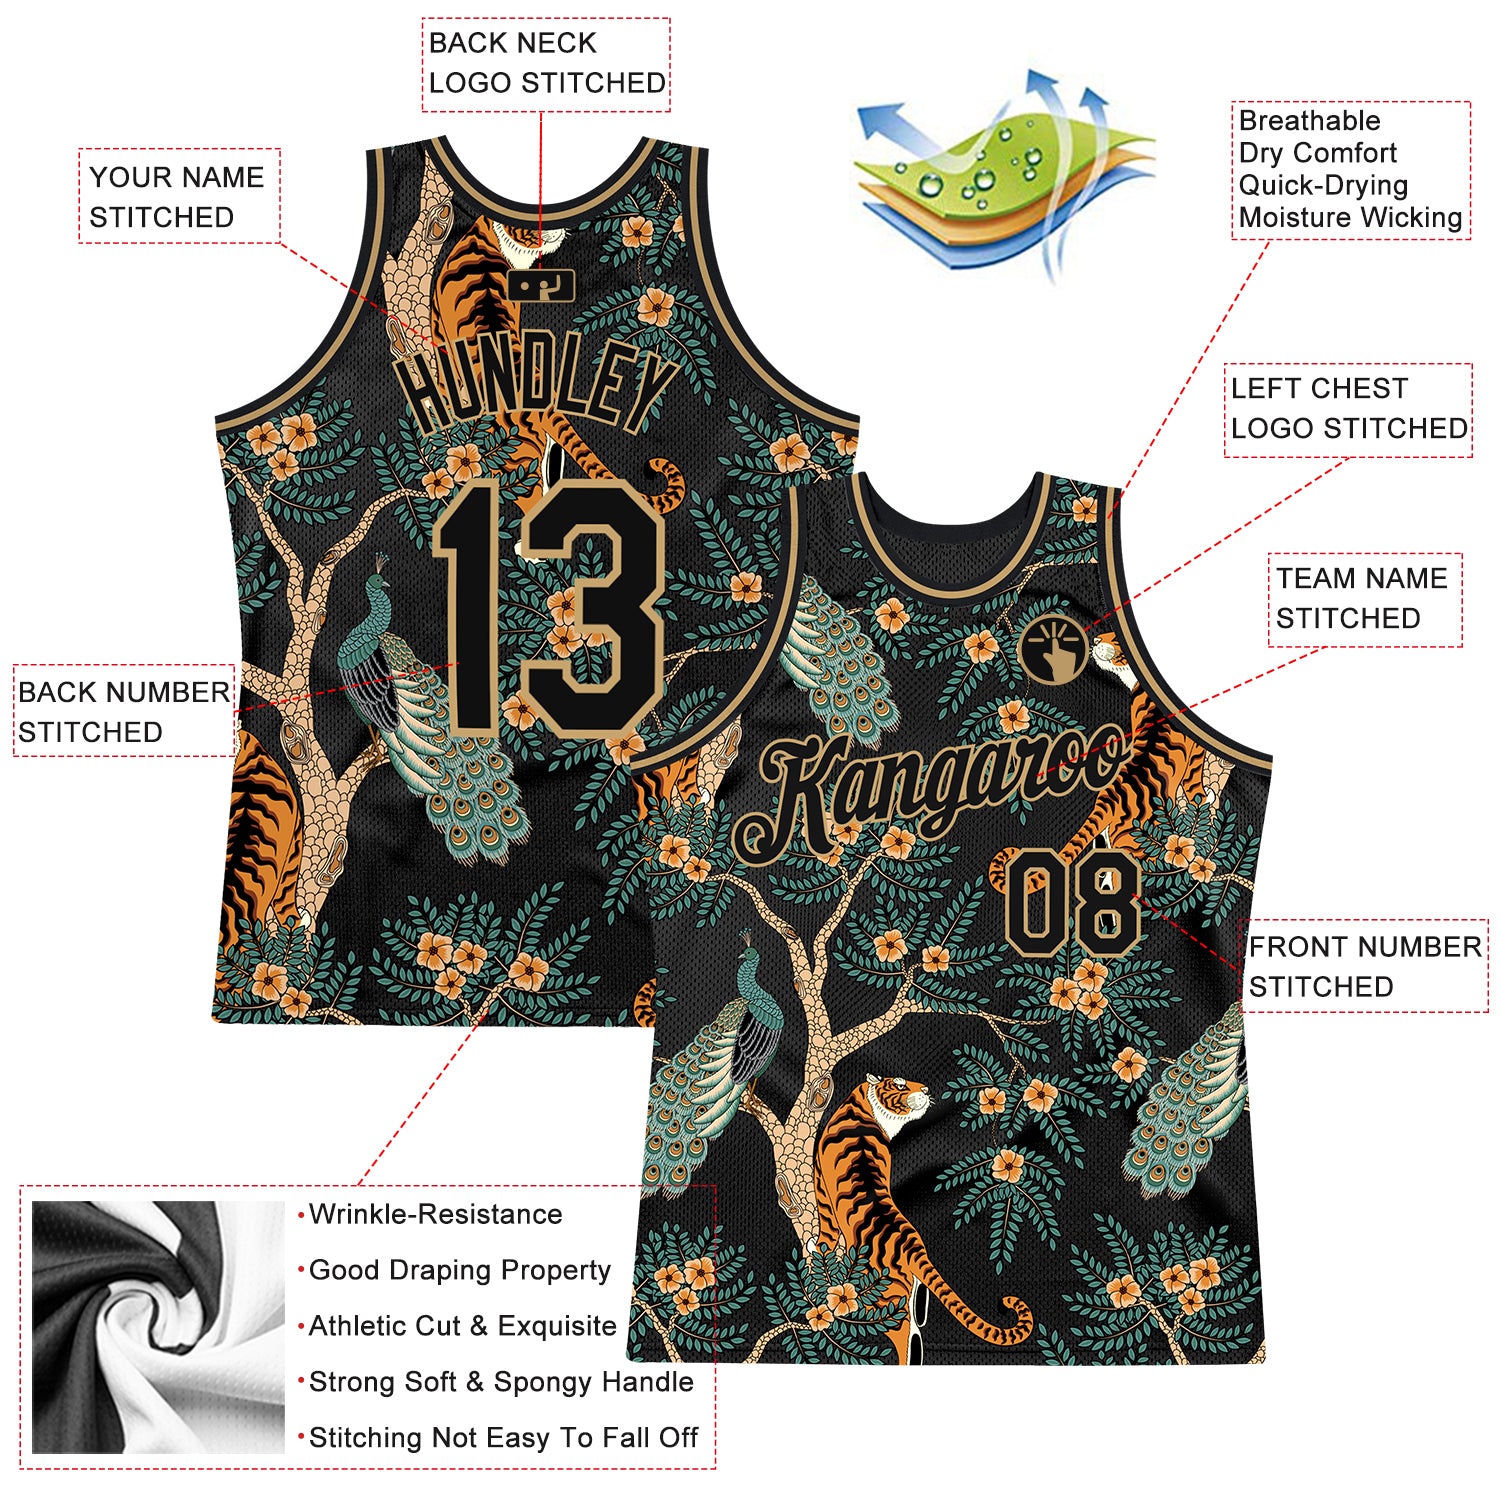 Shop Sublimation Basketball Jersey Design with great discounts and